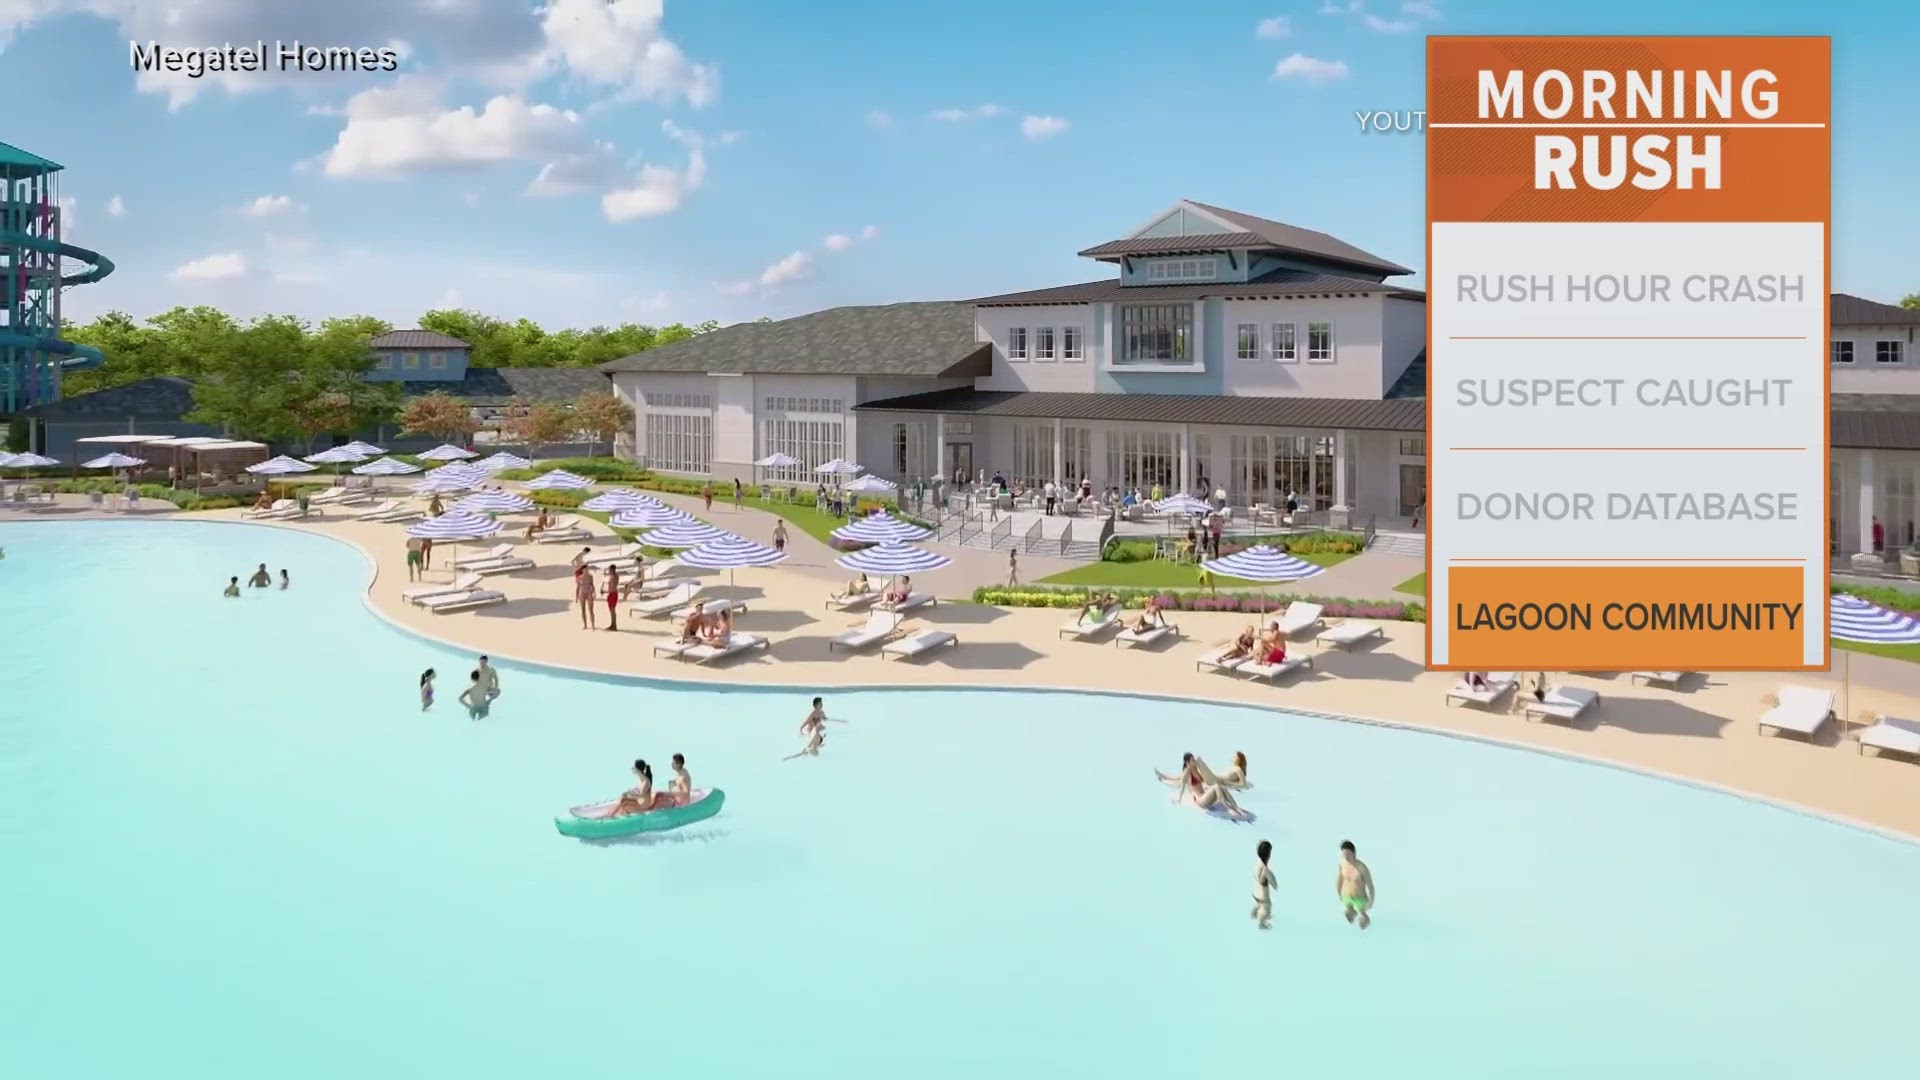 Dallas-based Megatel Homes LLC recently began constructing a $1 billion residential community centered around a massive lagoon in Anna.